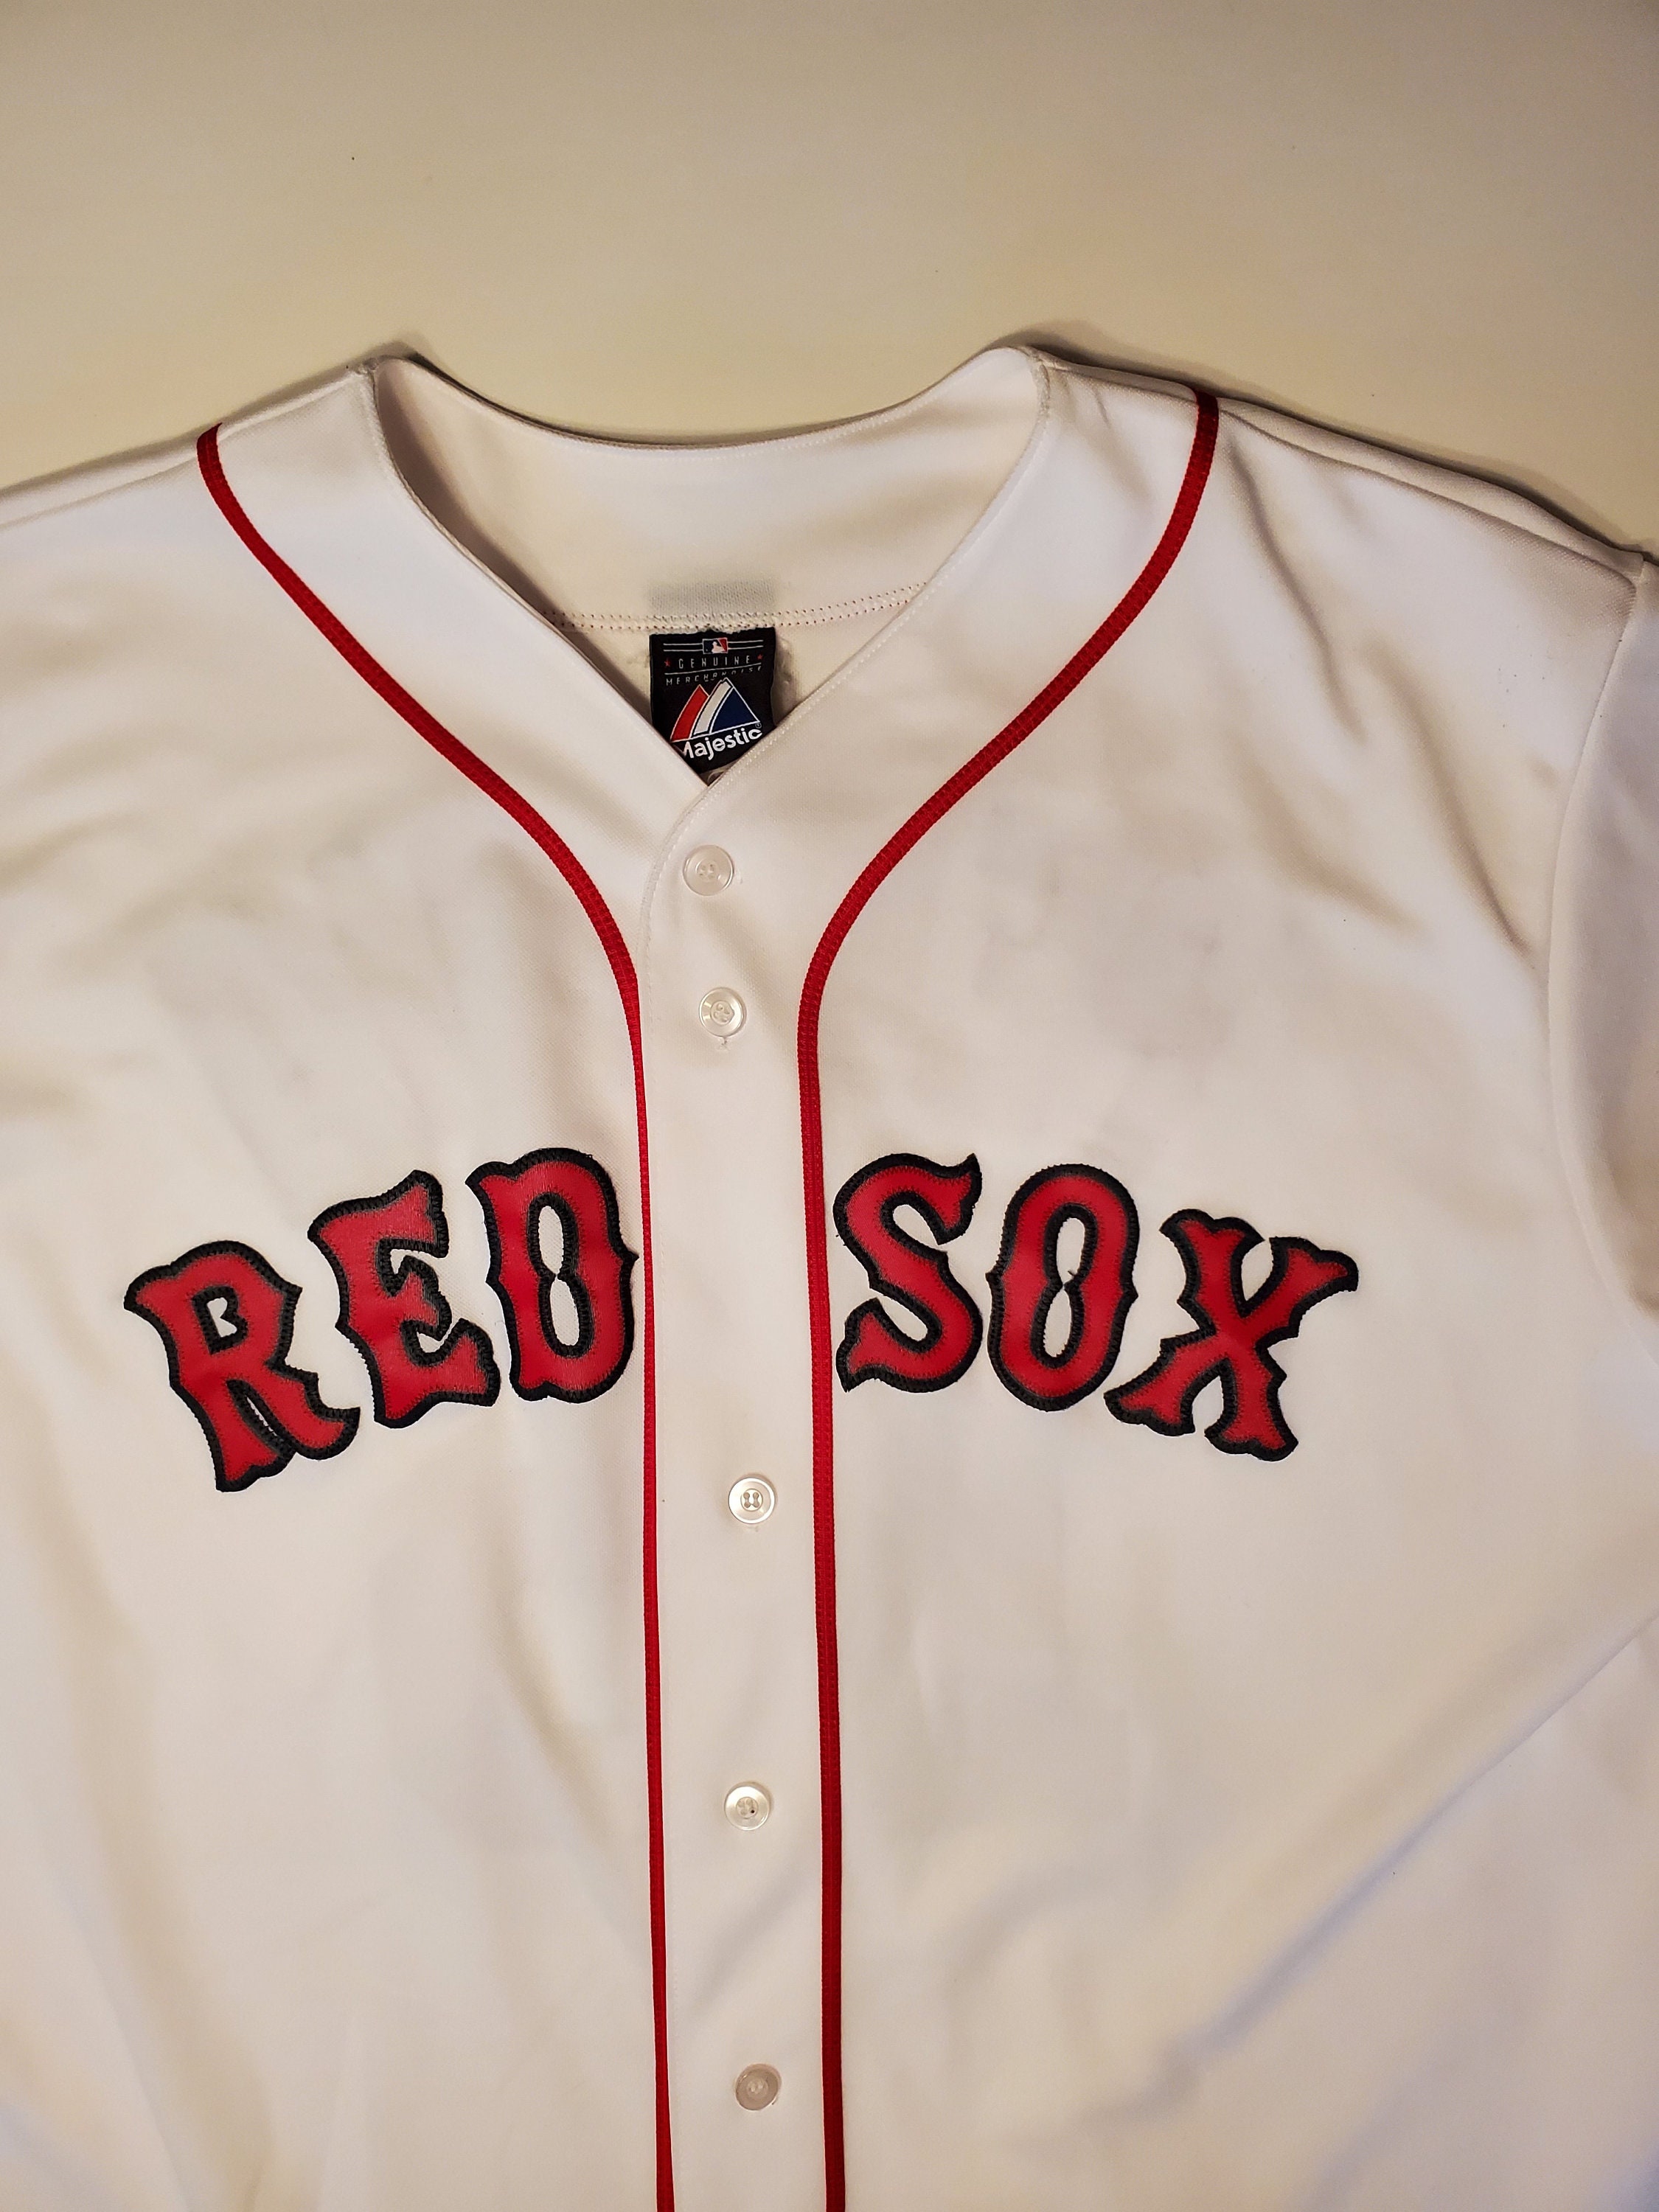 Vintage Majestic Boston Red Sox Pullover Warm Up Shirt Size XL *